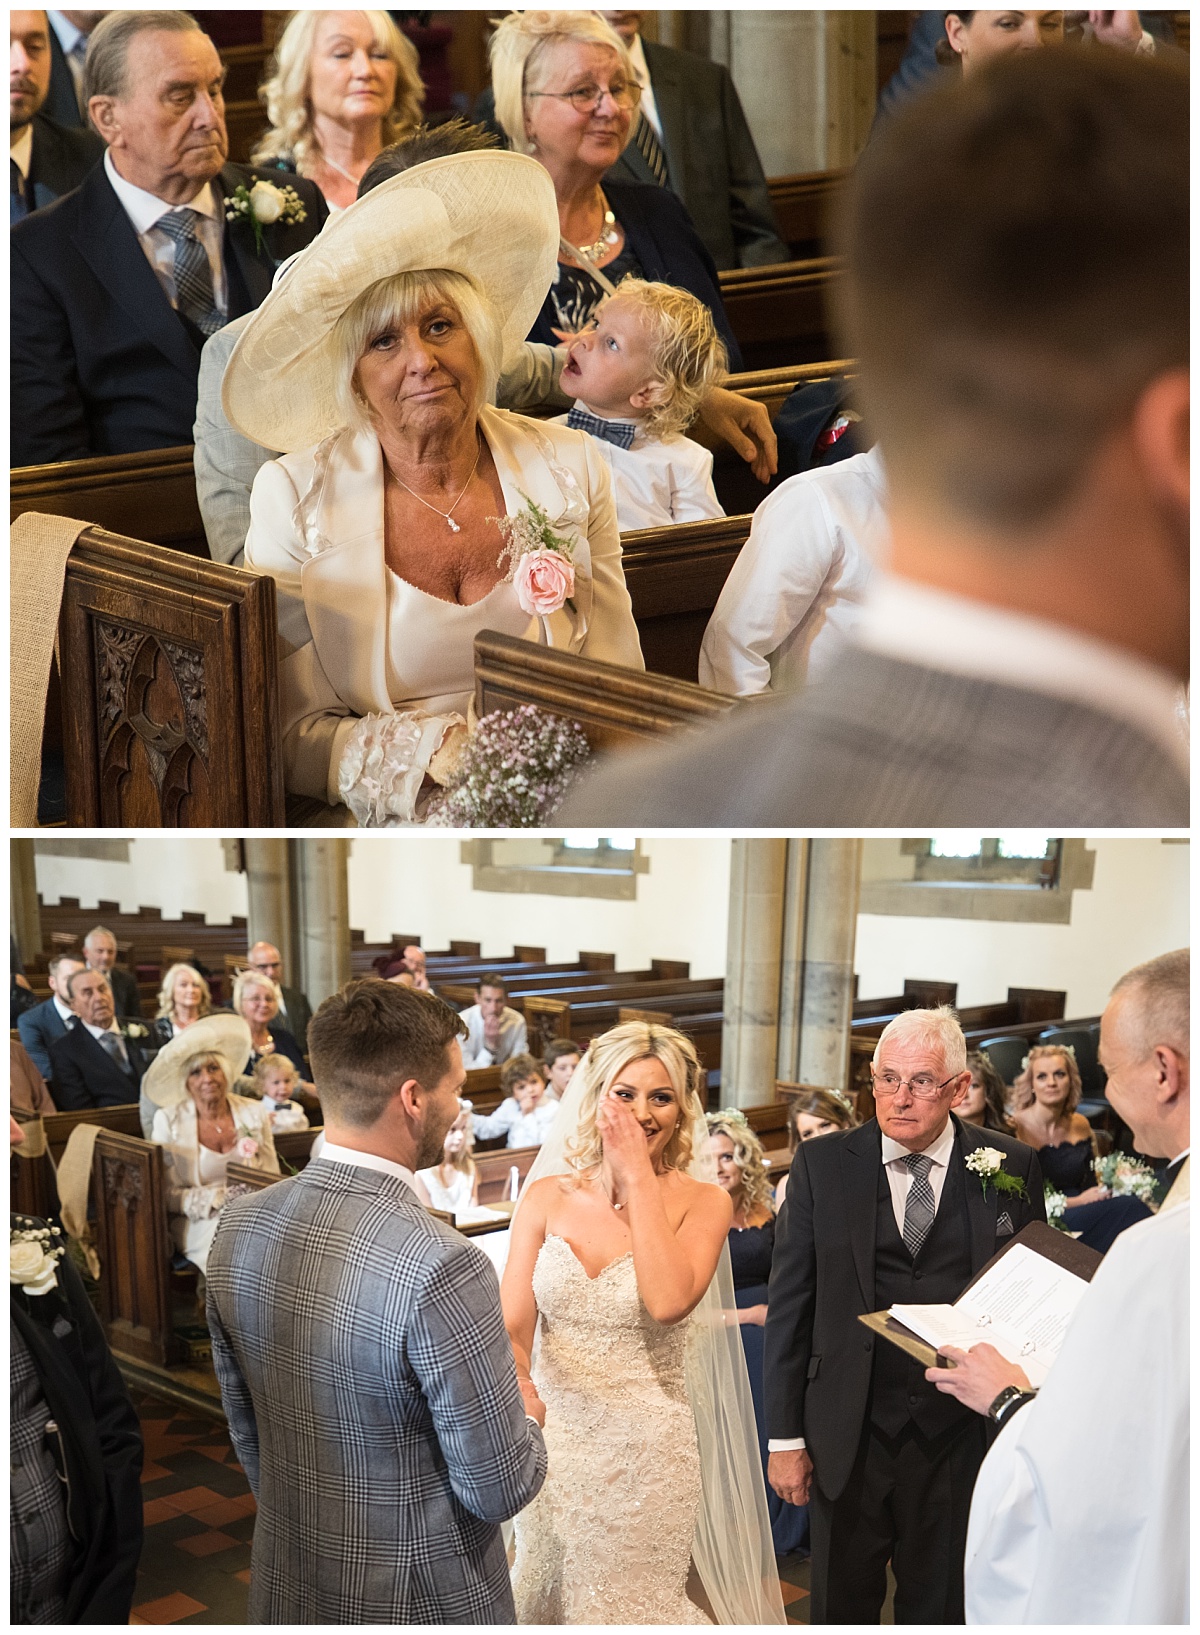 Wedding Photography Manchester - Brittany and Lee's Owen House Farm Wedding 33